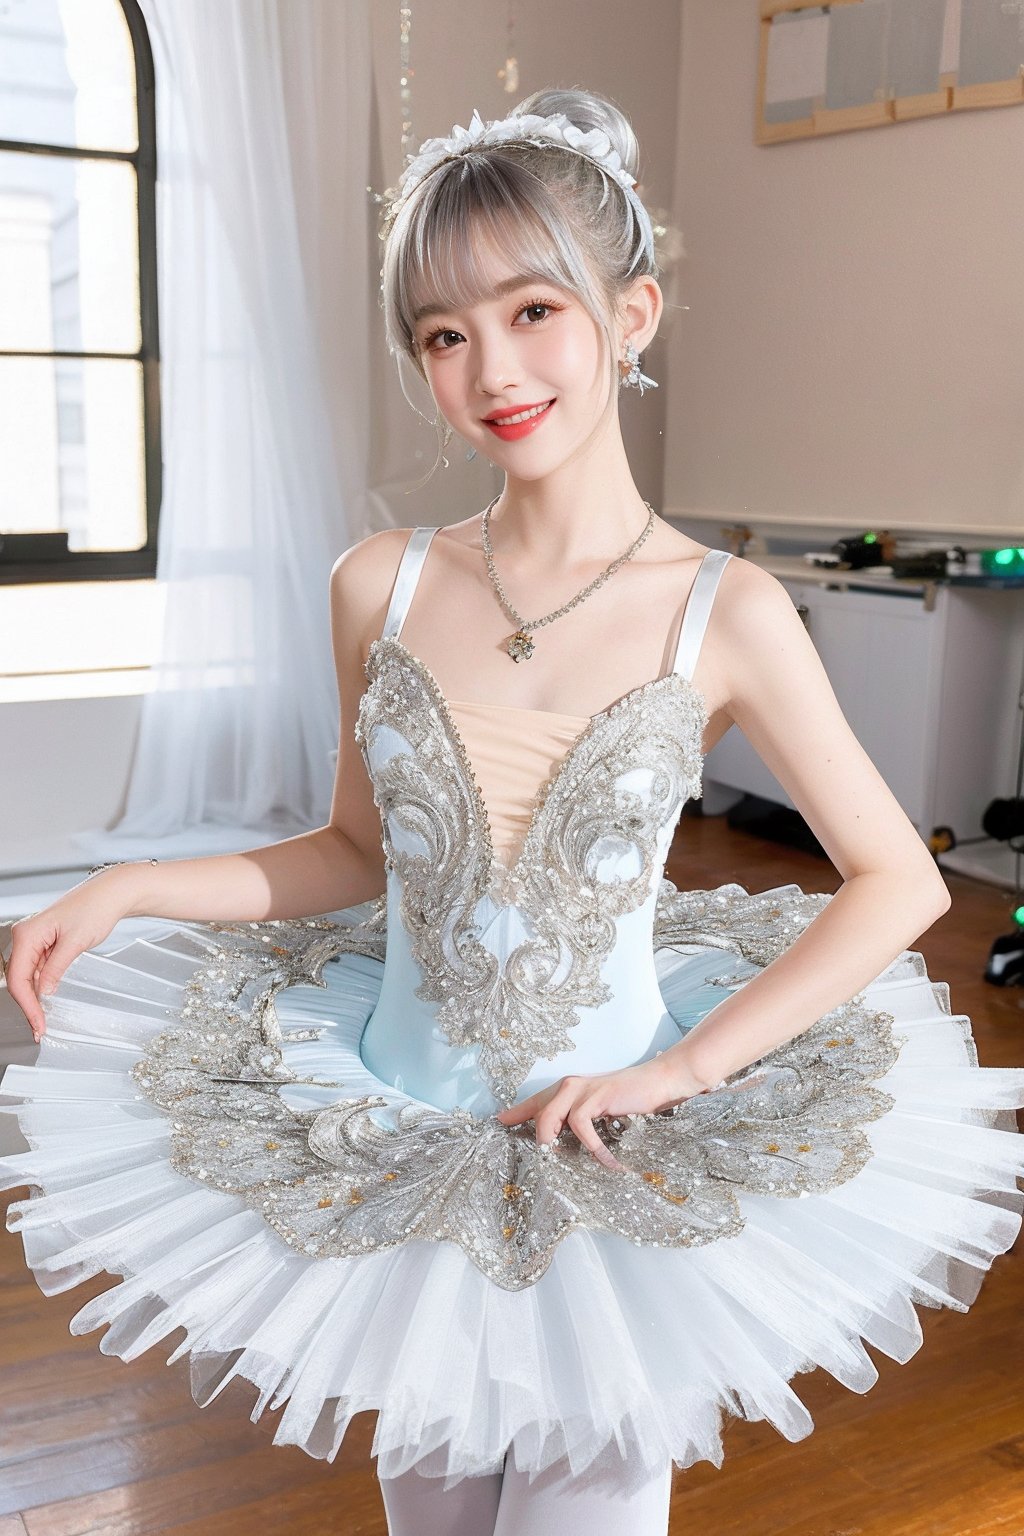 HDR,UHD,8K,best quality,masterpiece,Highly detailed,Studio lighting,ultra-fine painting,sharp focus,physically-based rendering,extreme detail description,Professional,masterpiece, best quality,delicate, beautiful,(1girl),(light silver Ballet_tutu:1.5),(jewelry:1.5),lace,(looking_at_viewer:1.2), realistic,(blunt bangs:1.2),(hair bun),(standing:1),(hair ornament:1.2), (jewelry necklace:1),dance classroom background,(Half-length photo:1),(smile:1),(white lace stockings:1),